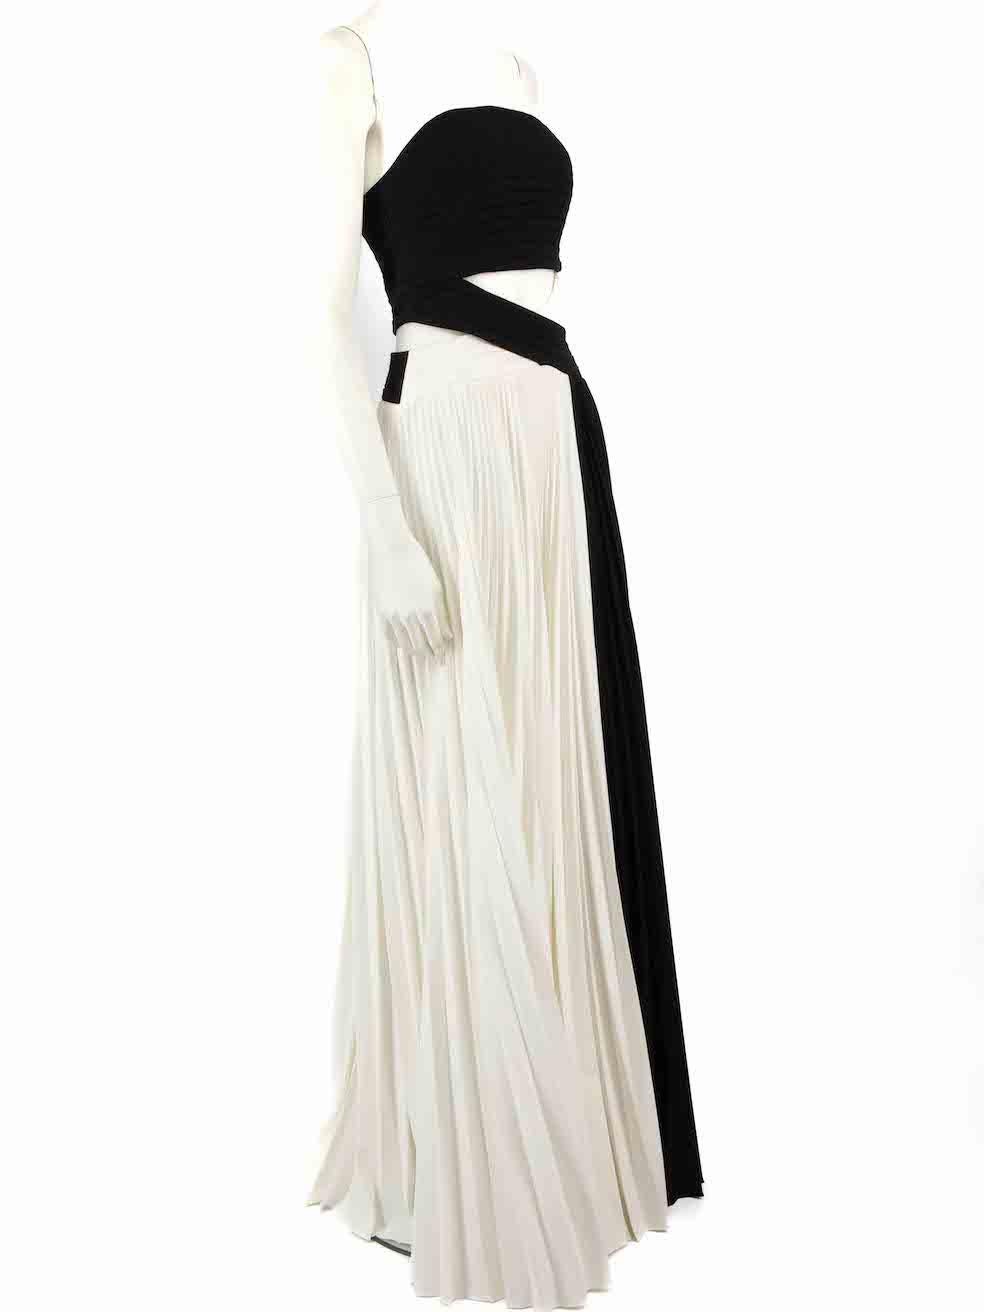 Honayda S/S23 Black & White Strapless Pleated Gown Size S In New Condition For Sale In London, GB